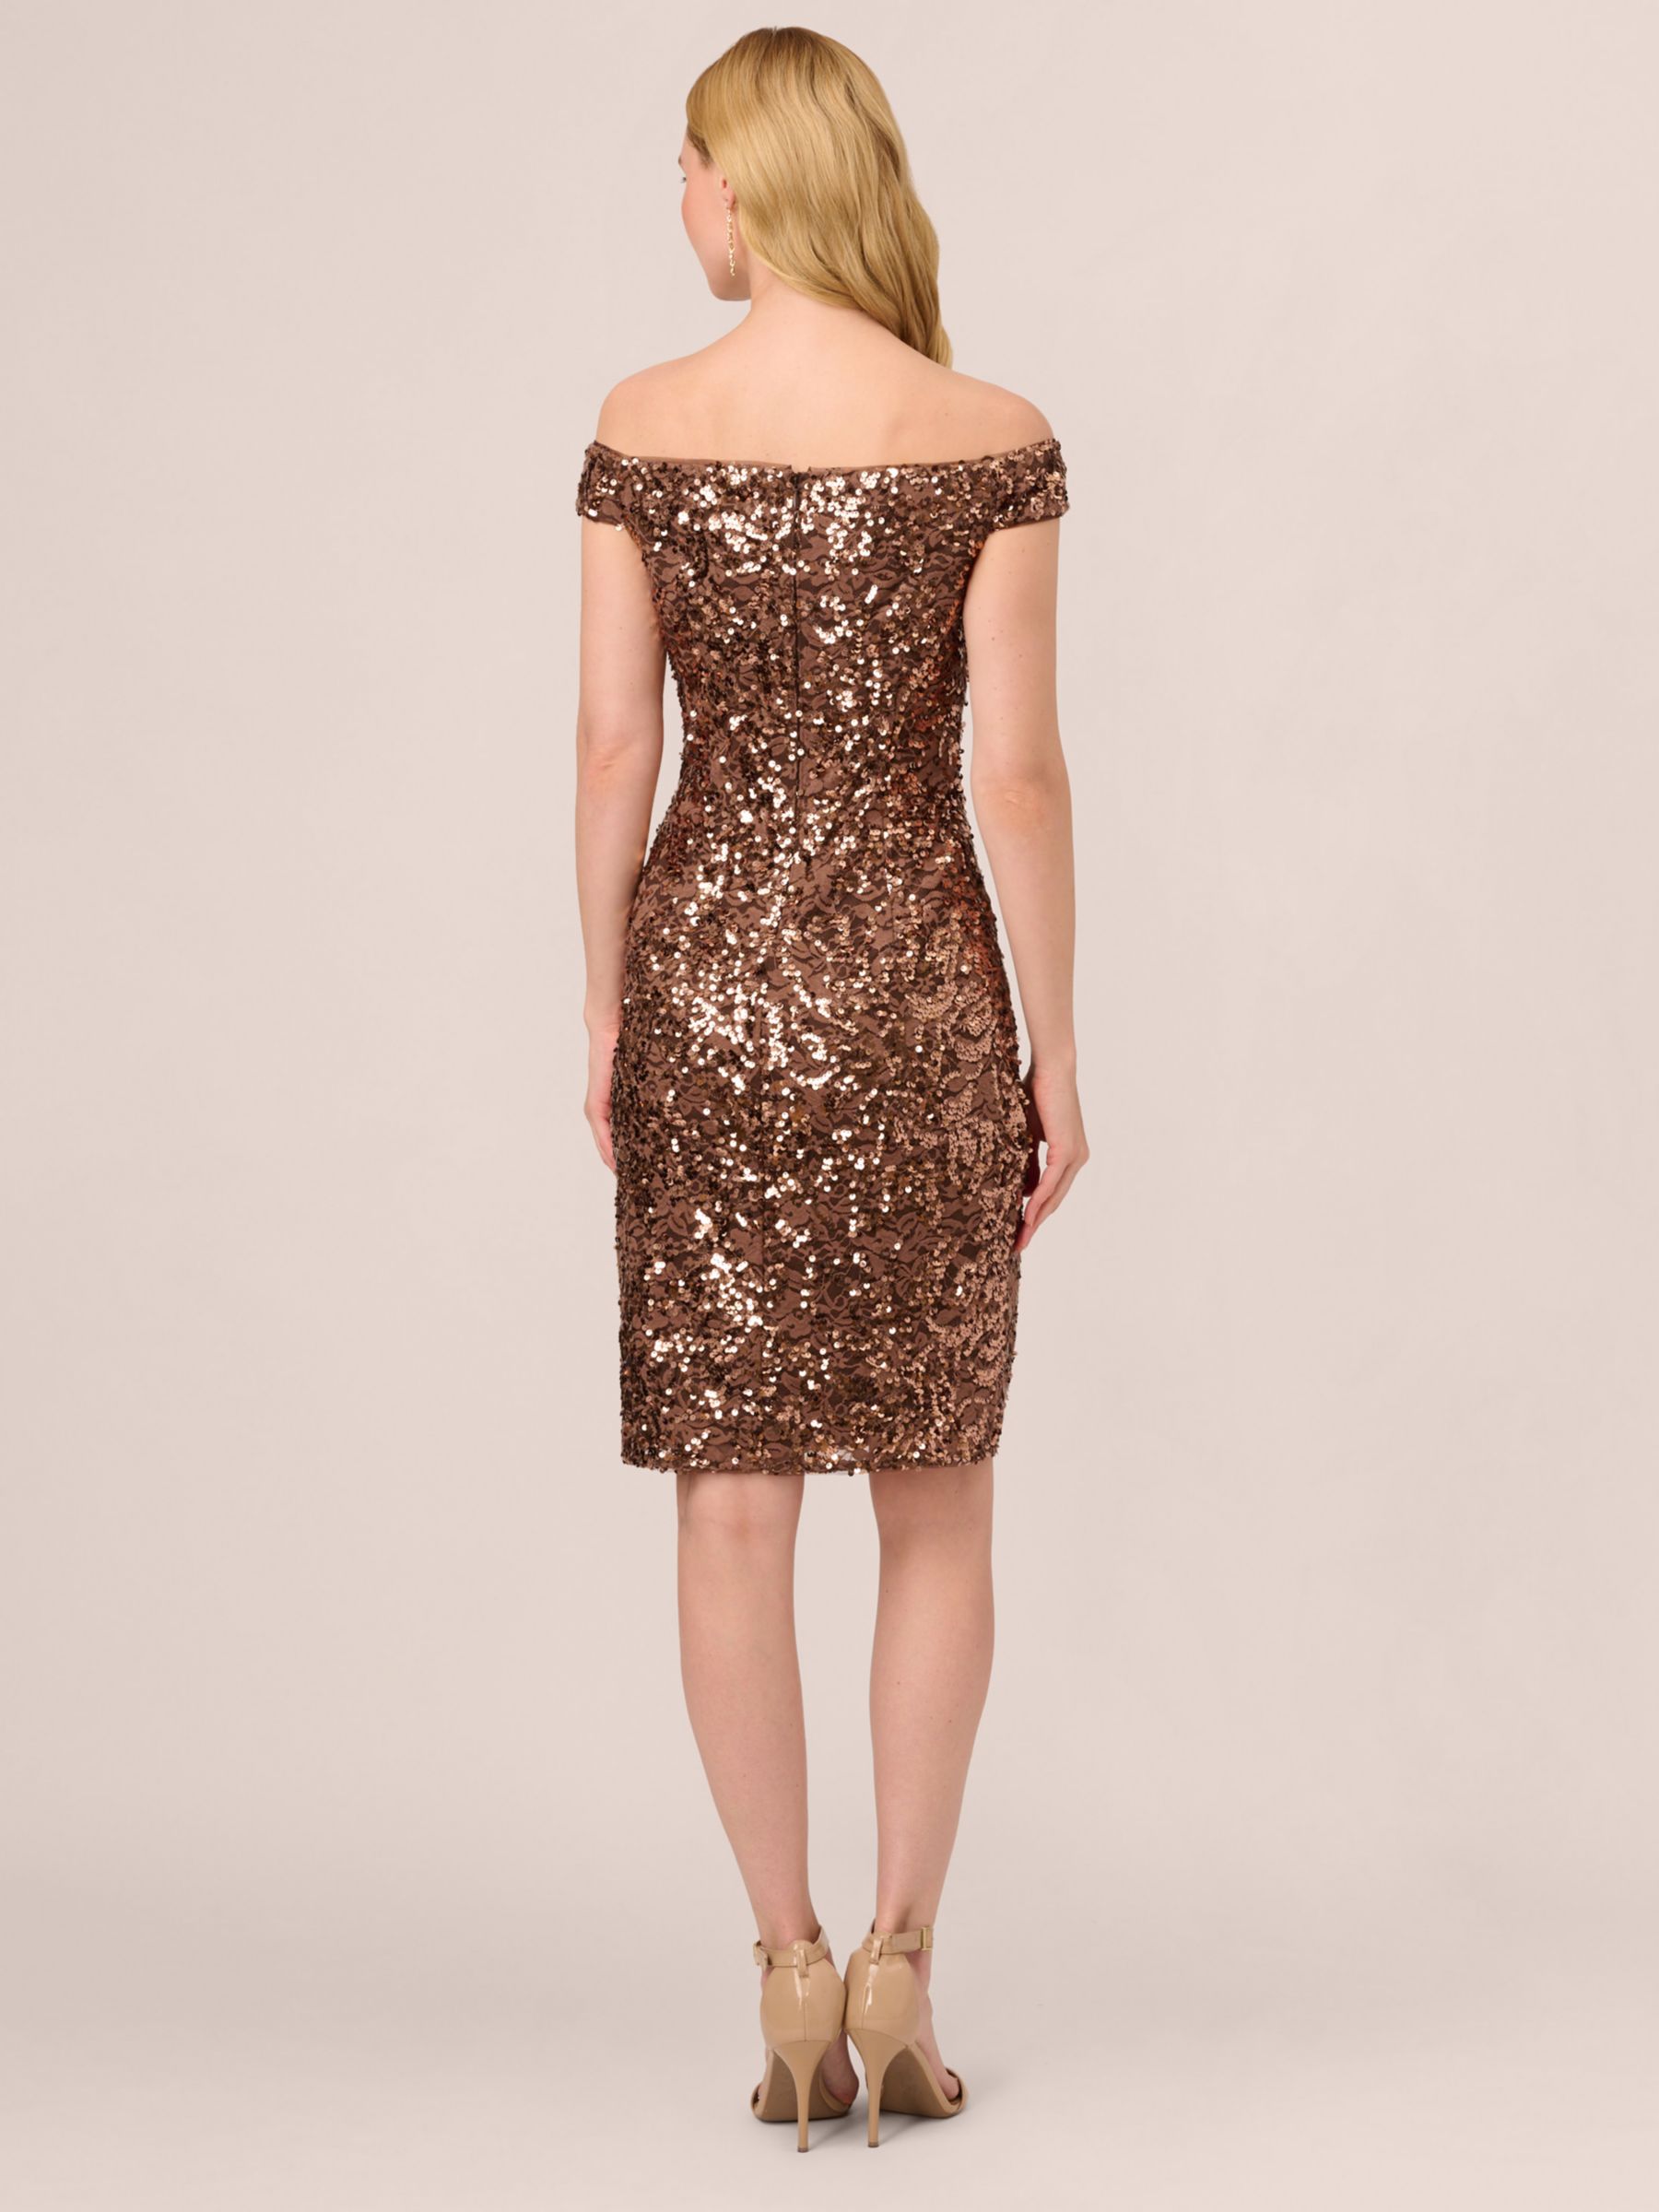 Adrianna Papell Off Shoulder Sequin Dress, Copper at John Lewis & Partners